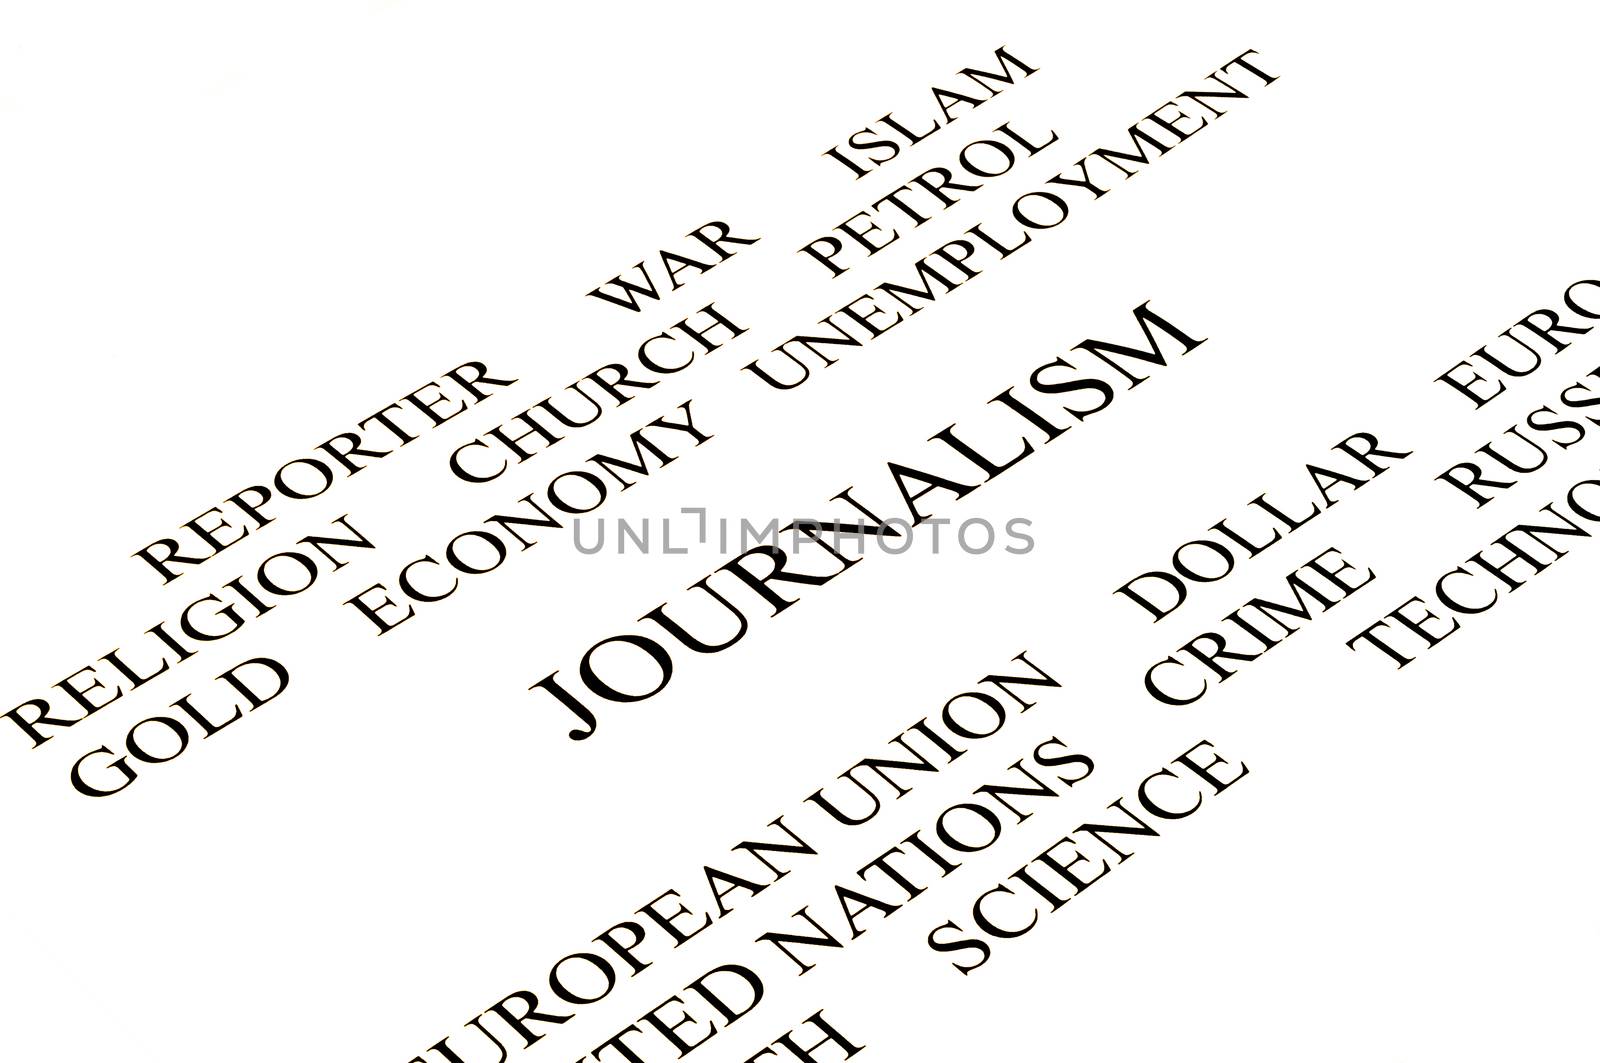 journalist conceptual banner in white background white and black